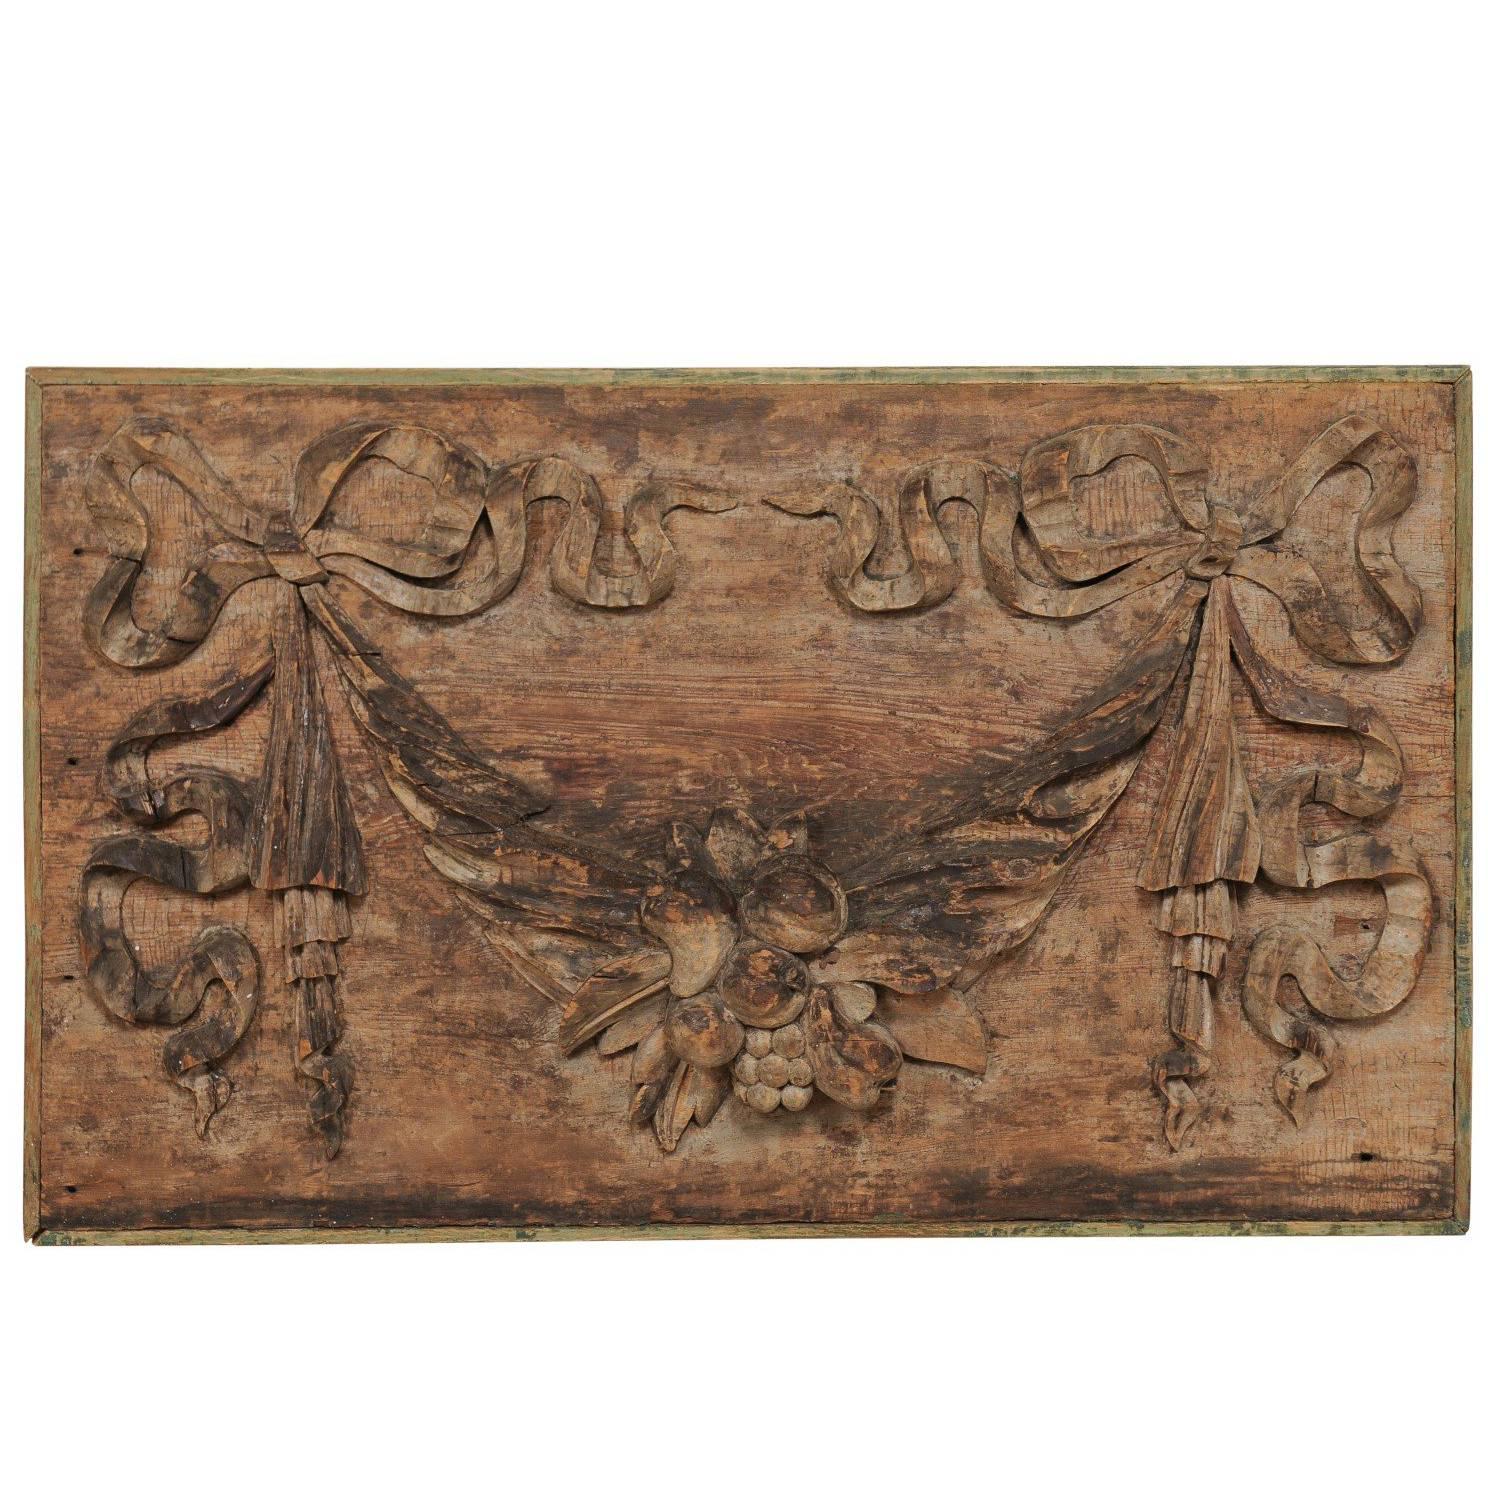 Italian 19th Century Hand-Carved Wood Wall Plaque with Fruit, Swag & Bow Motifs